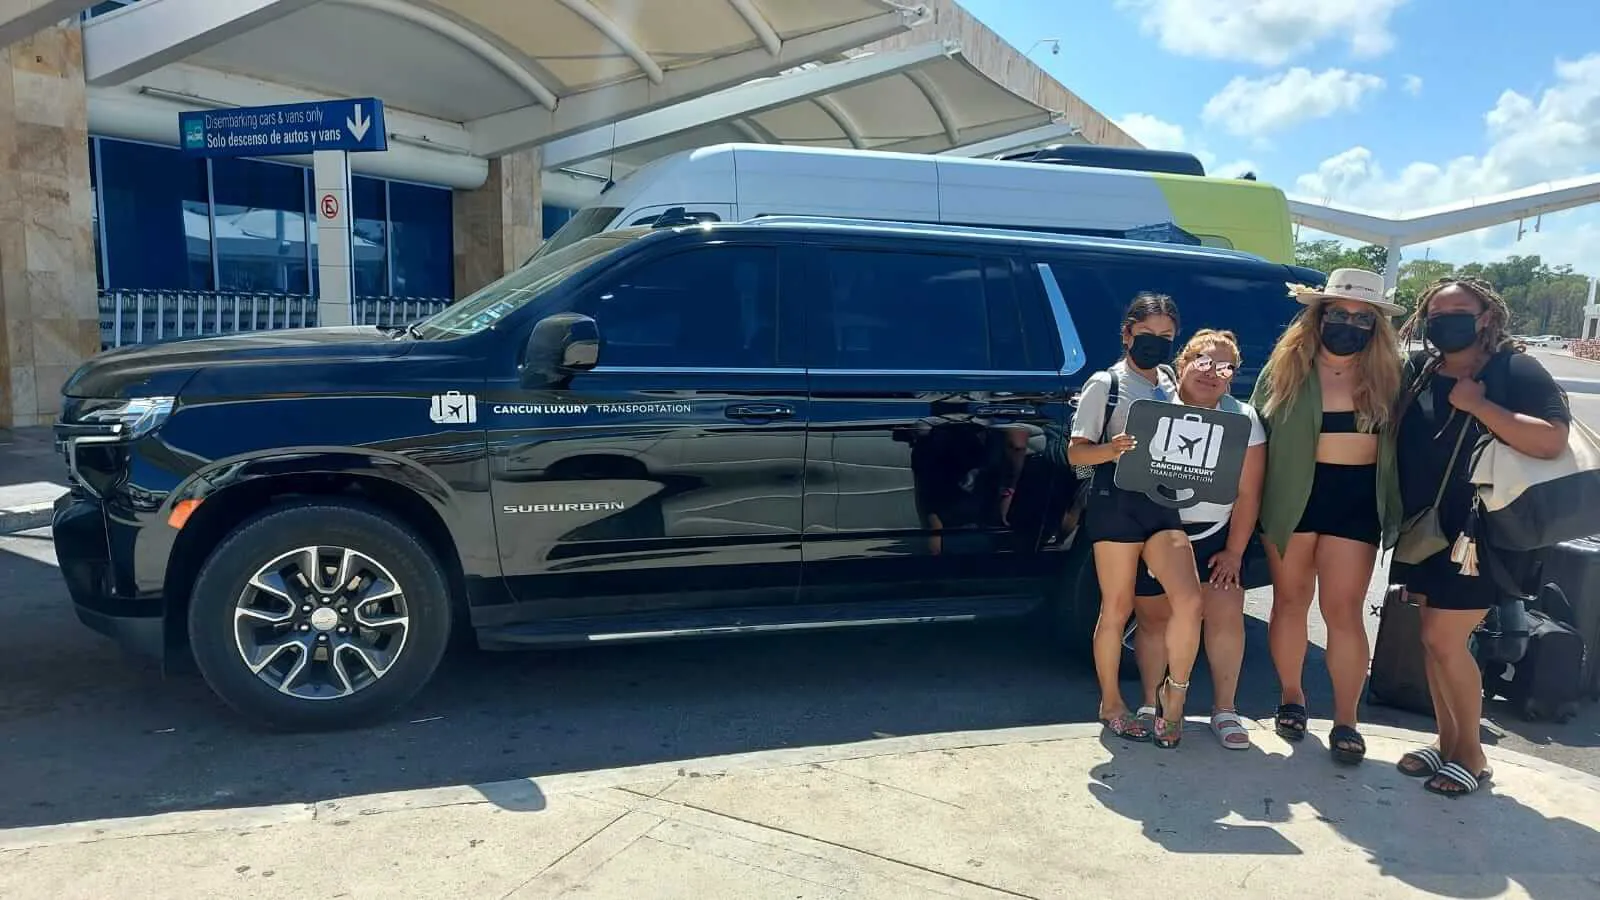 Group of 4 women arriving at Cancun Airport by luxury transportation